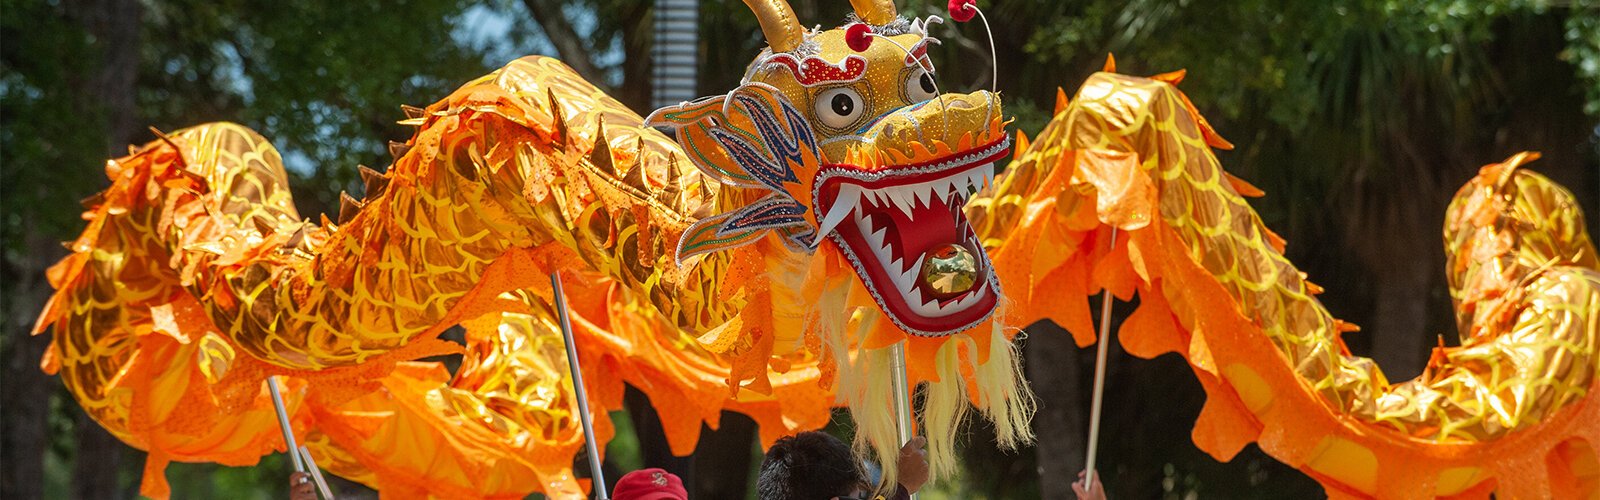 The Suncoast Asian Cultural Association (SACA) performs a Dragon Dance at the start of the Multicultural Family Day event in Tampa.